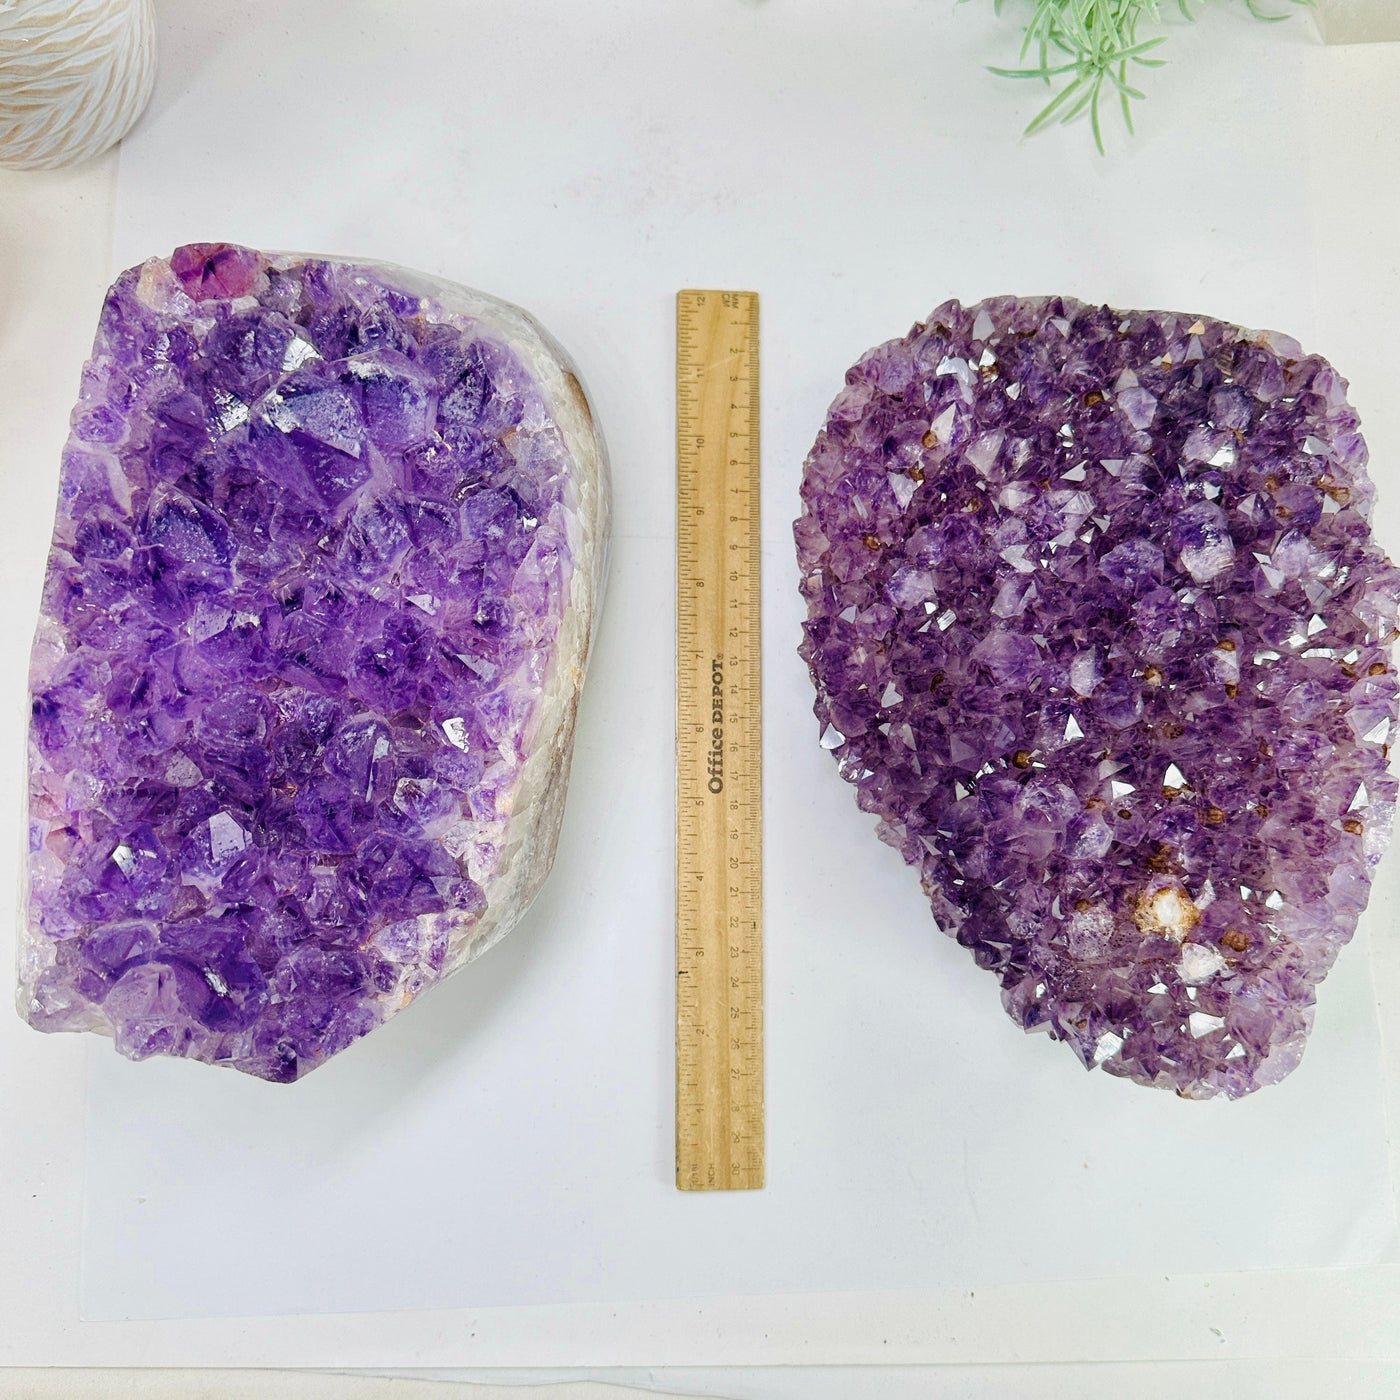 Amethyst Cluster Semi Polished Crystal - Collector's Piece - YOU CHOOSE variants C D with ruler for size reference